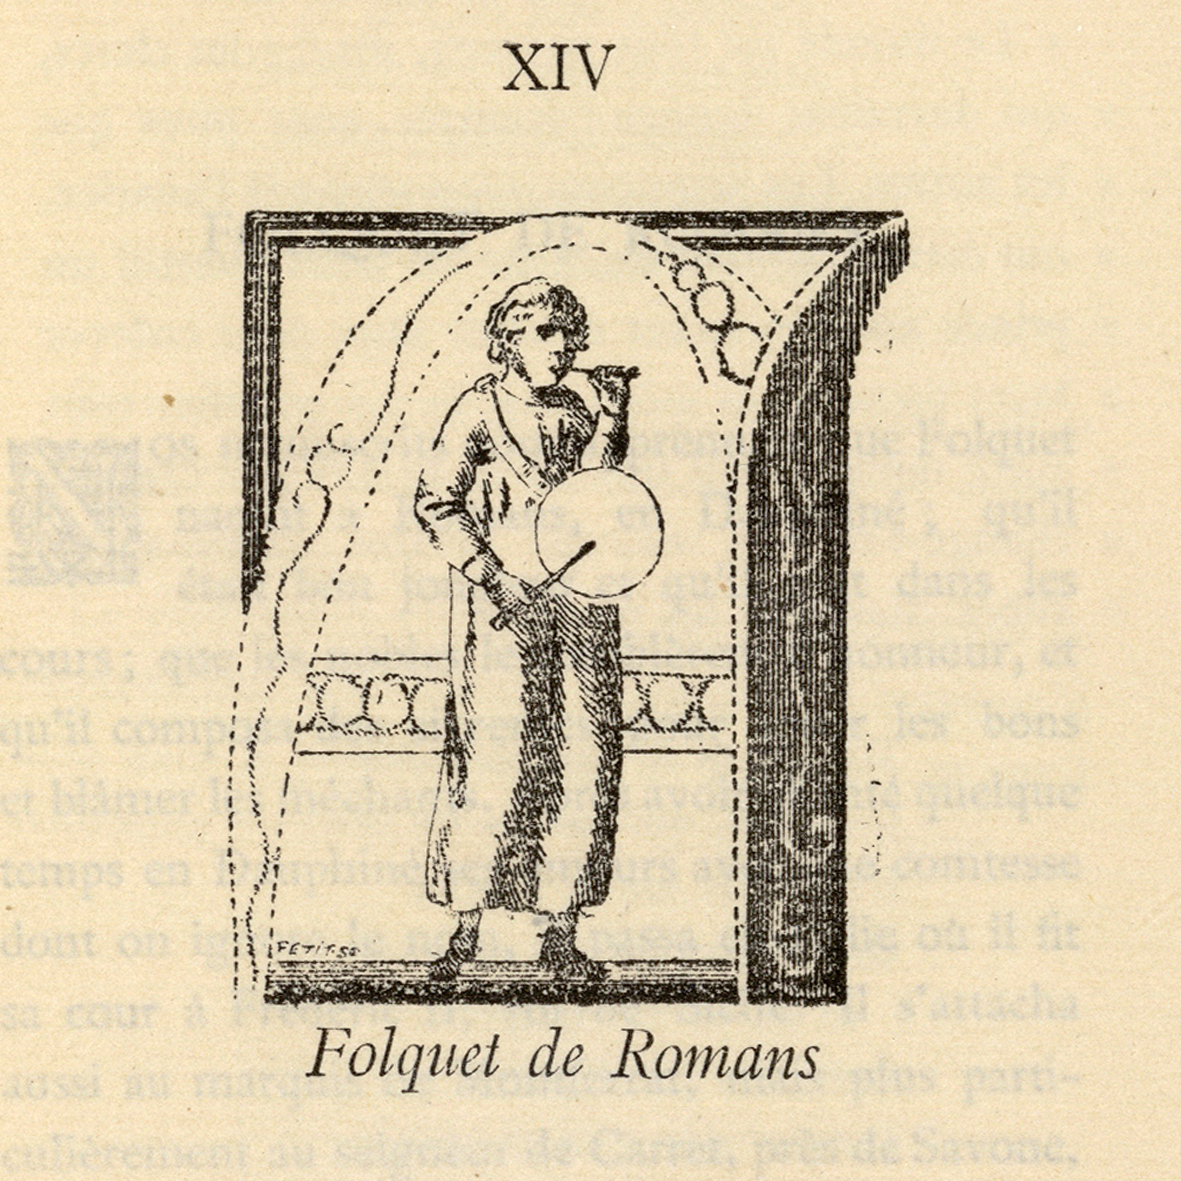 an old book with an illustration of a man and woman in it